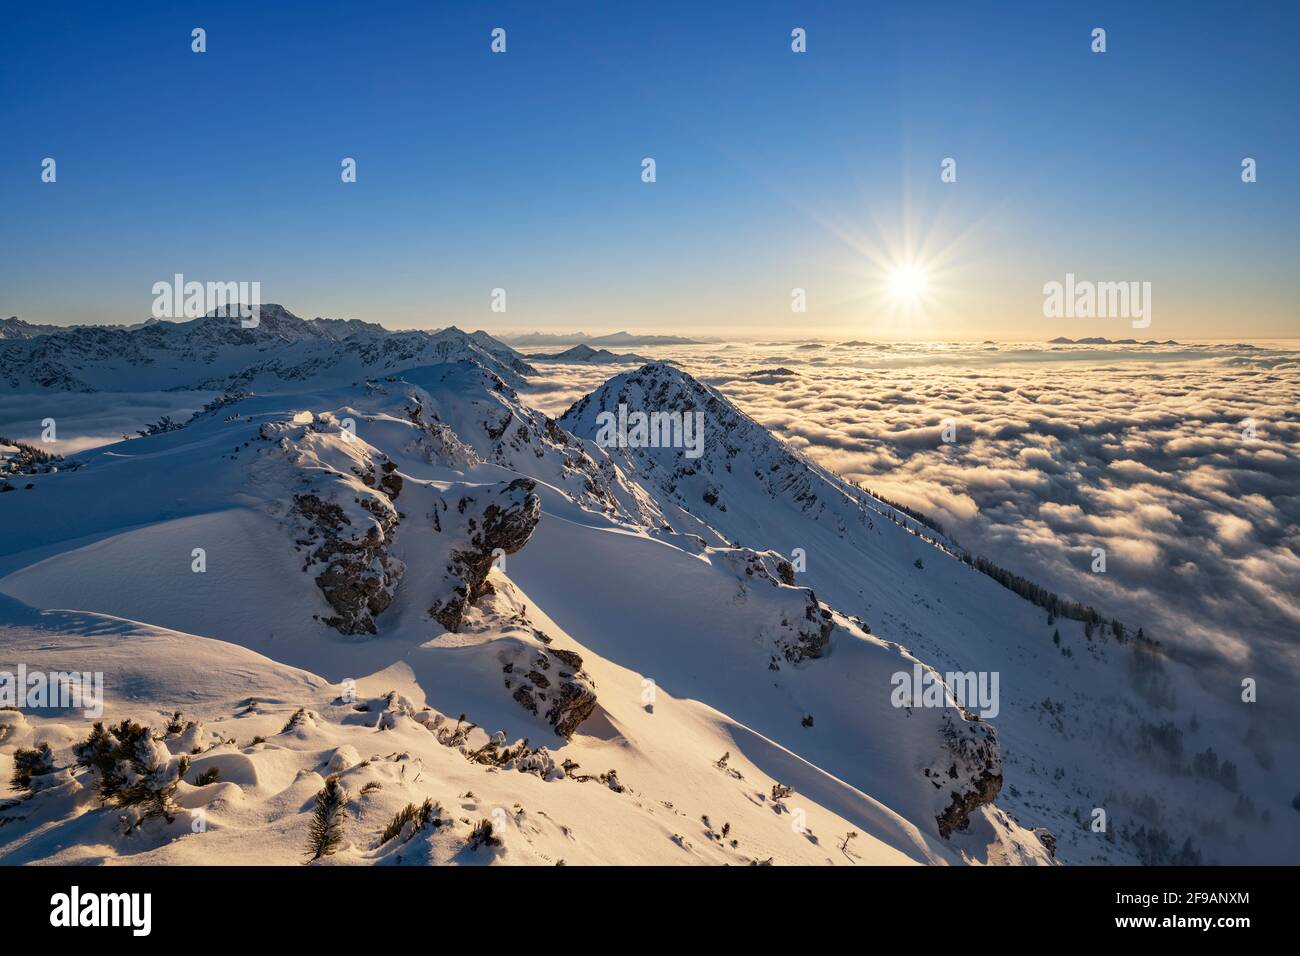 Winter mountain landscape at sunset over sea of clouds. View from Kühgundkopf to the Allgäu Alps. Bavaria, Germany, Europe Stock Photo